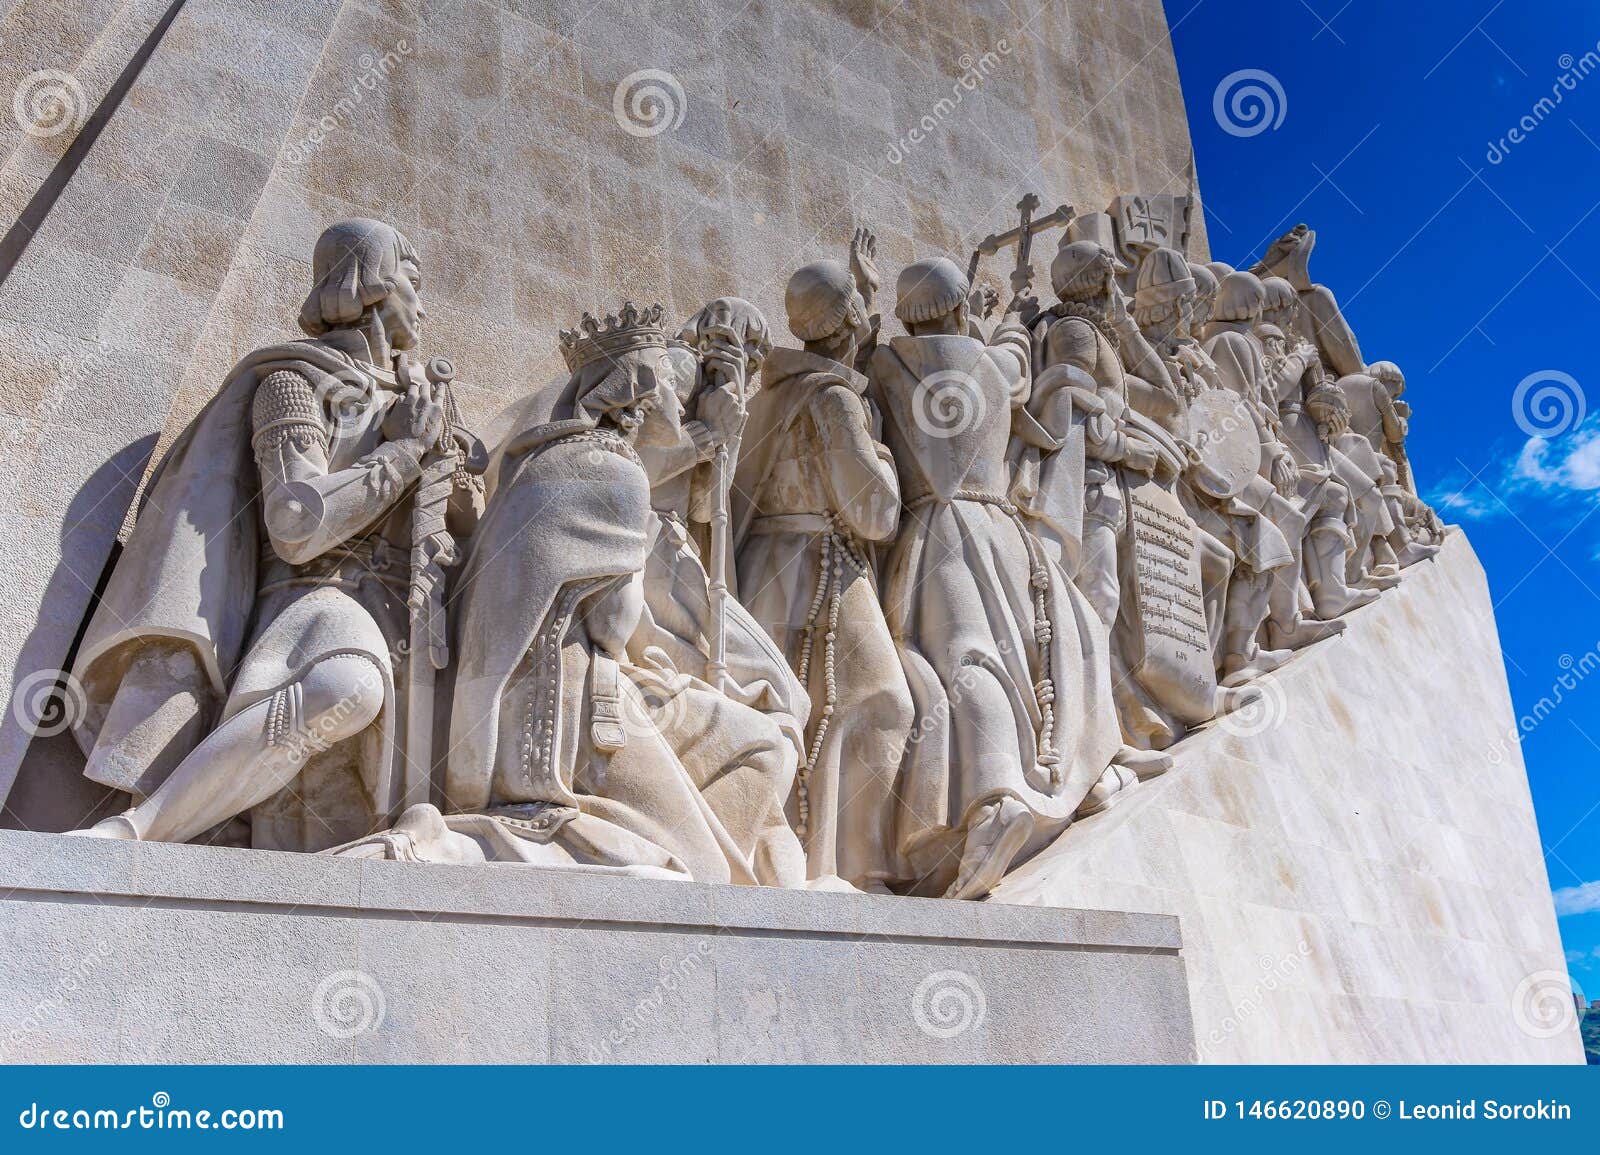 Monument To the Discoveries at Belem. Portugal Editorial Image - Image ...